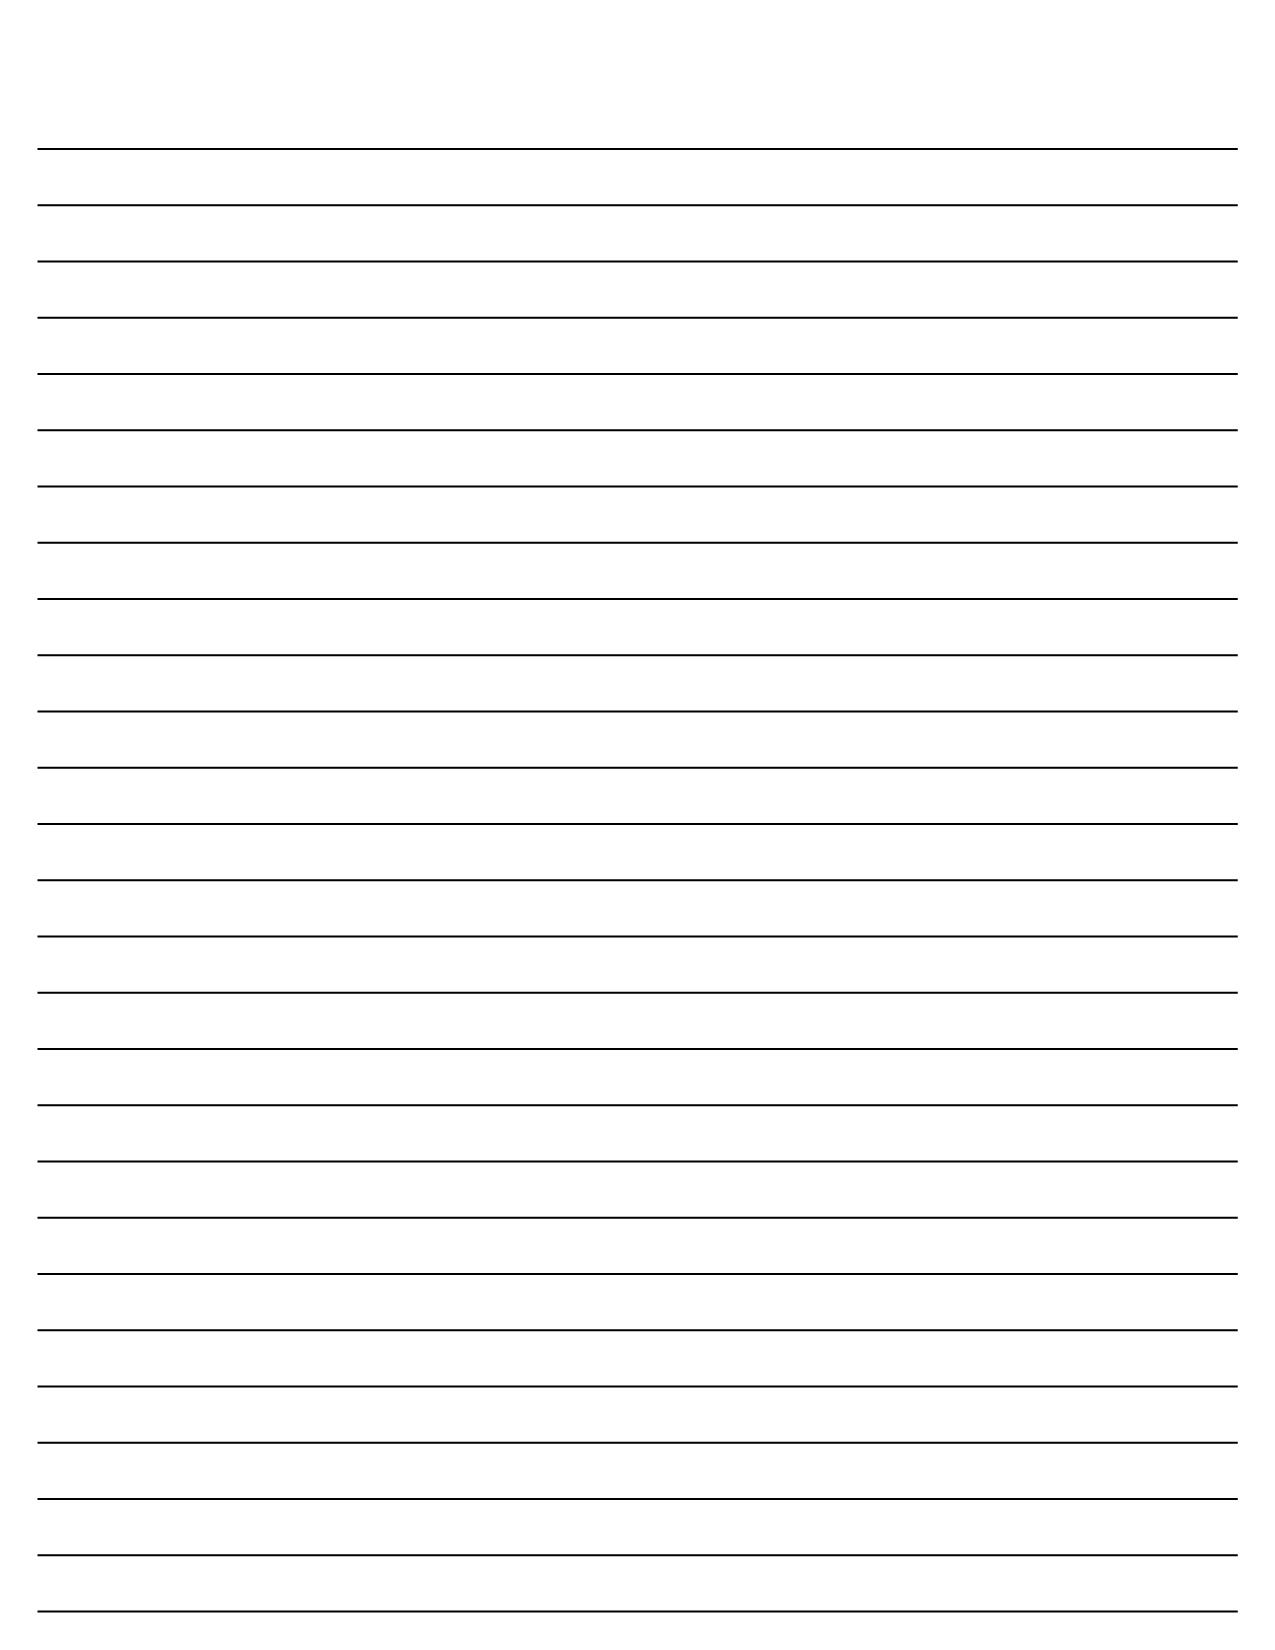 Lined Paper Printable Free